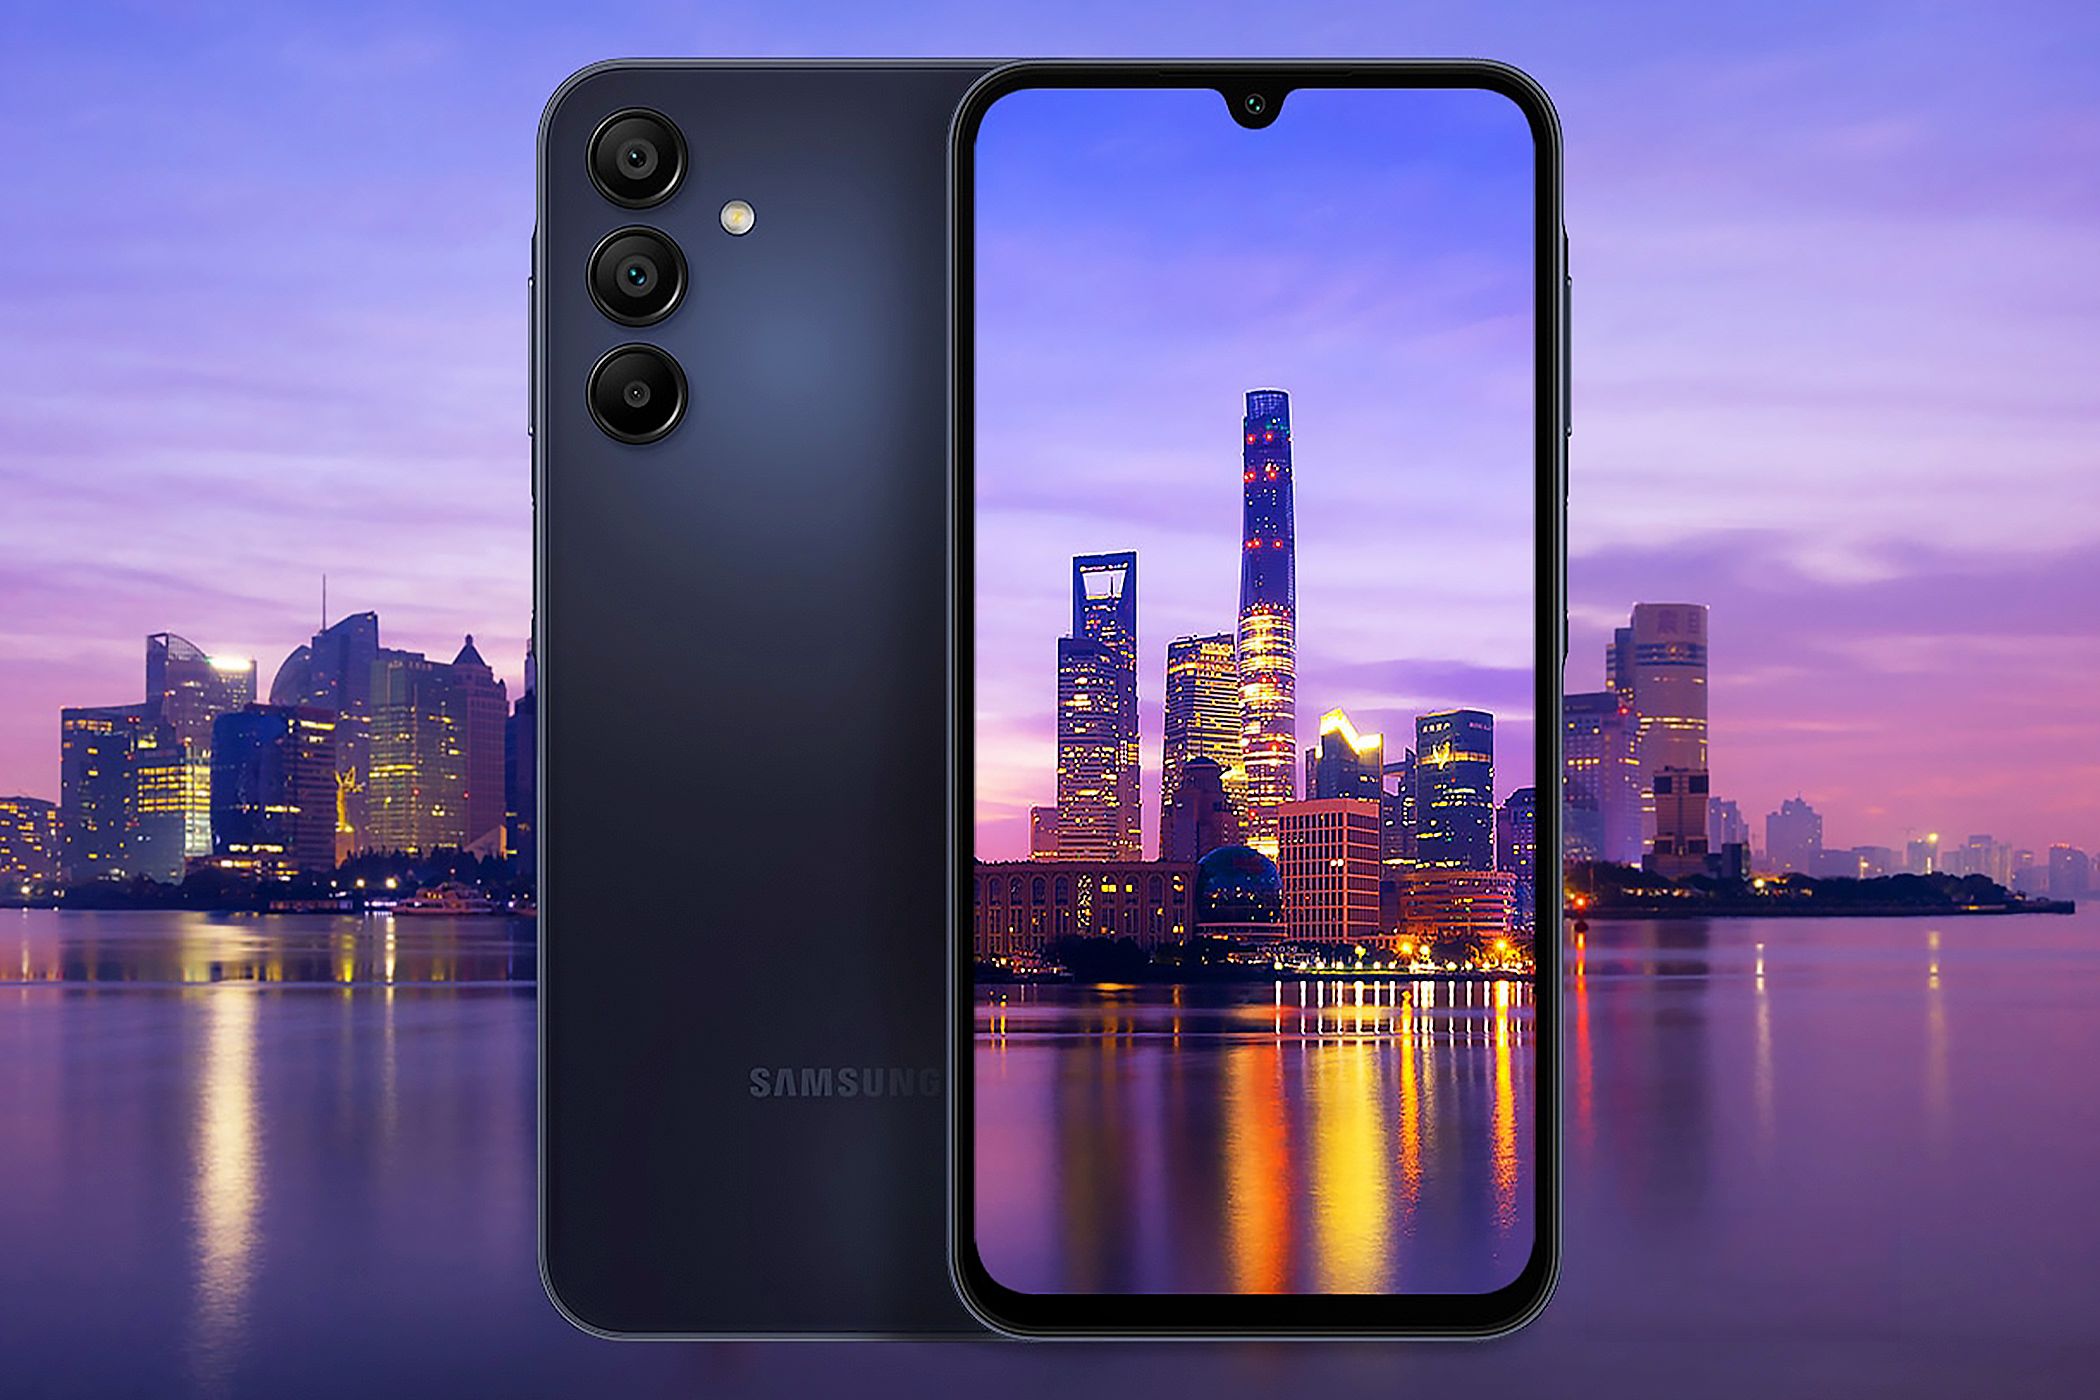 Illustration of Samsung Galaxy A15's front and backside over a city skyline.